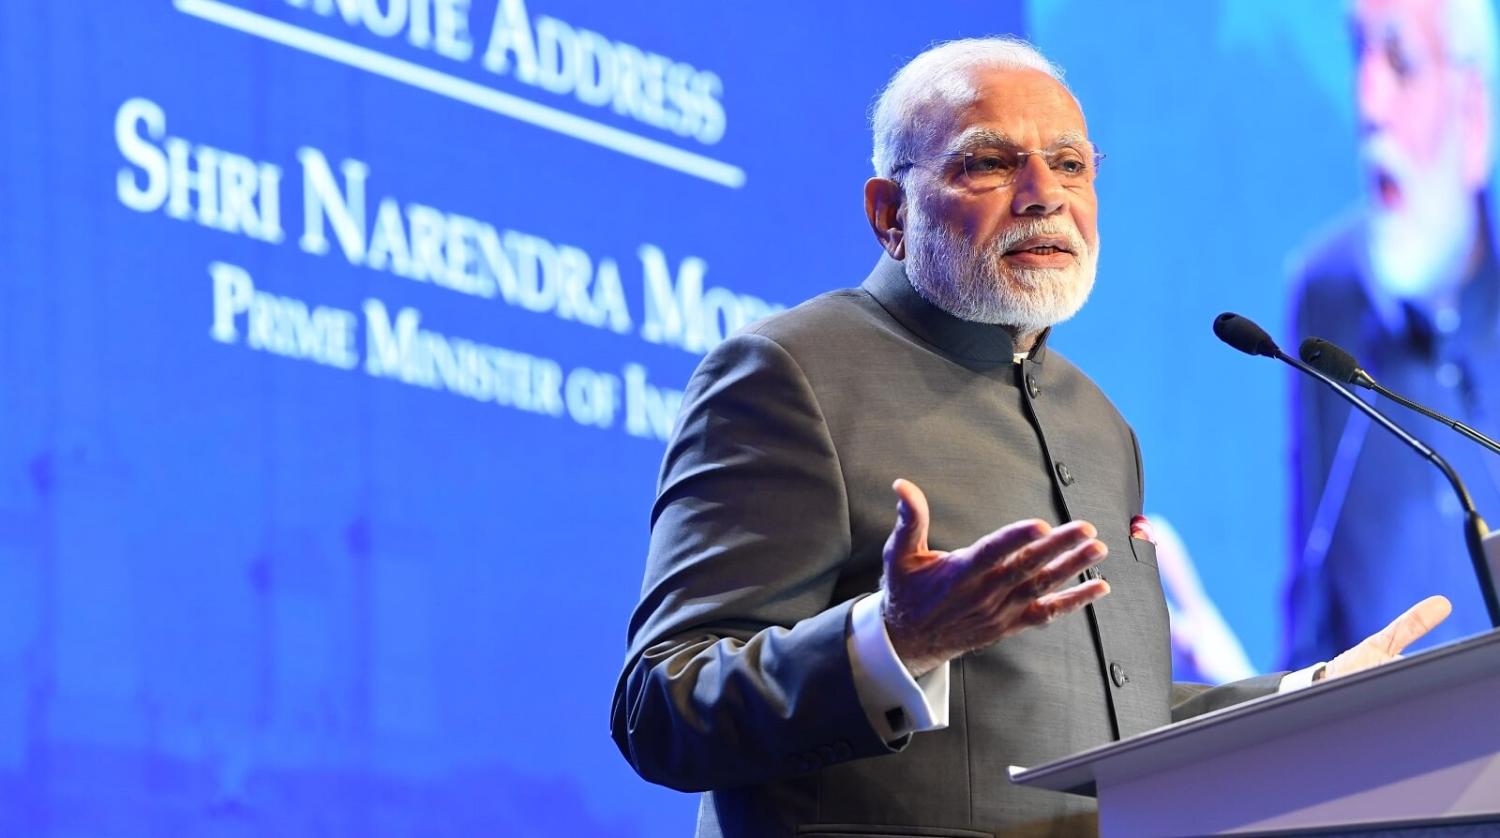 Indian Prime Minister Narendra Modi at the Shangri-La Dialogue, Singapore, 1 June (Photo: MEAphotogallery/Flickr)